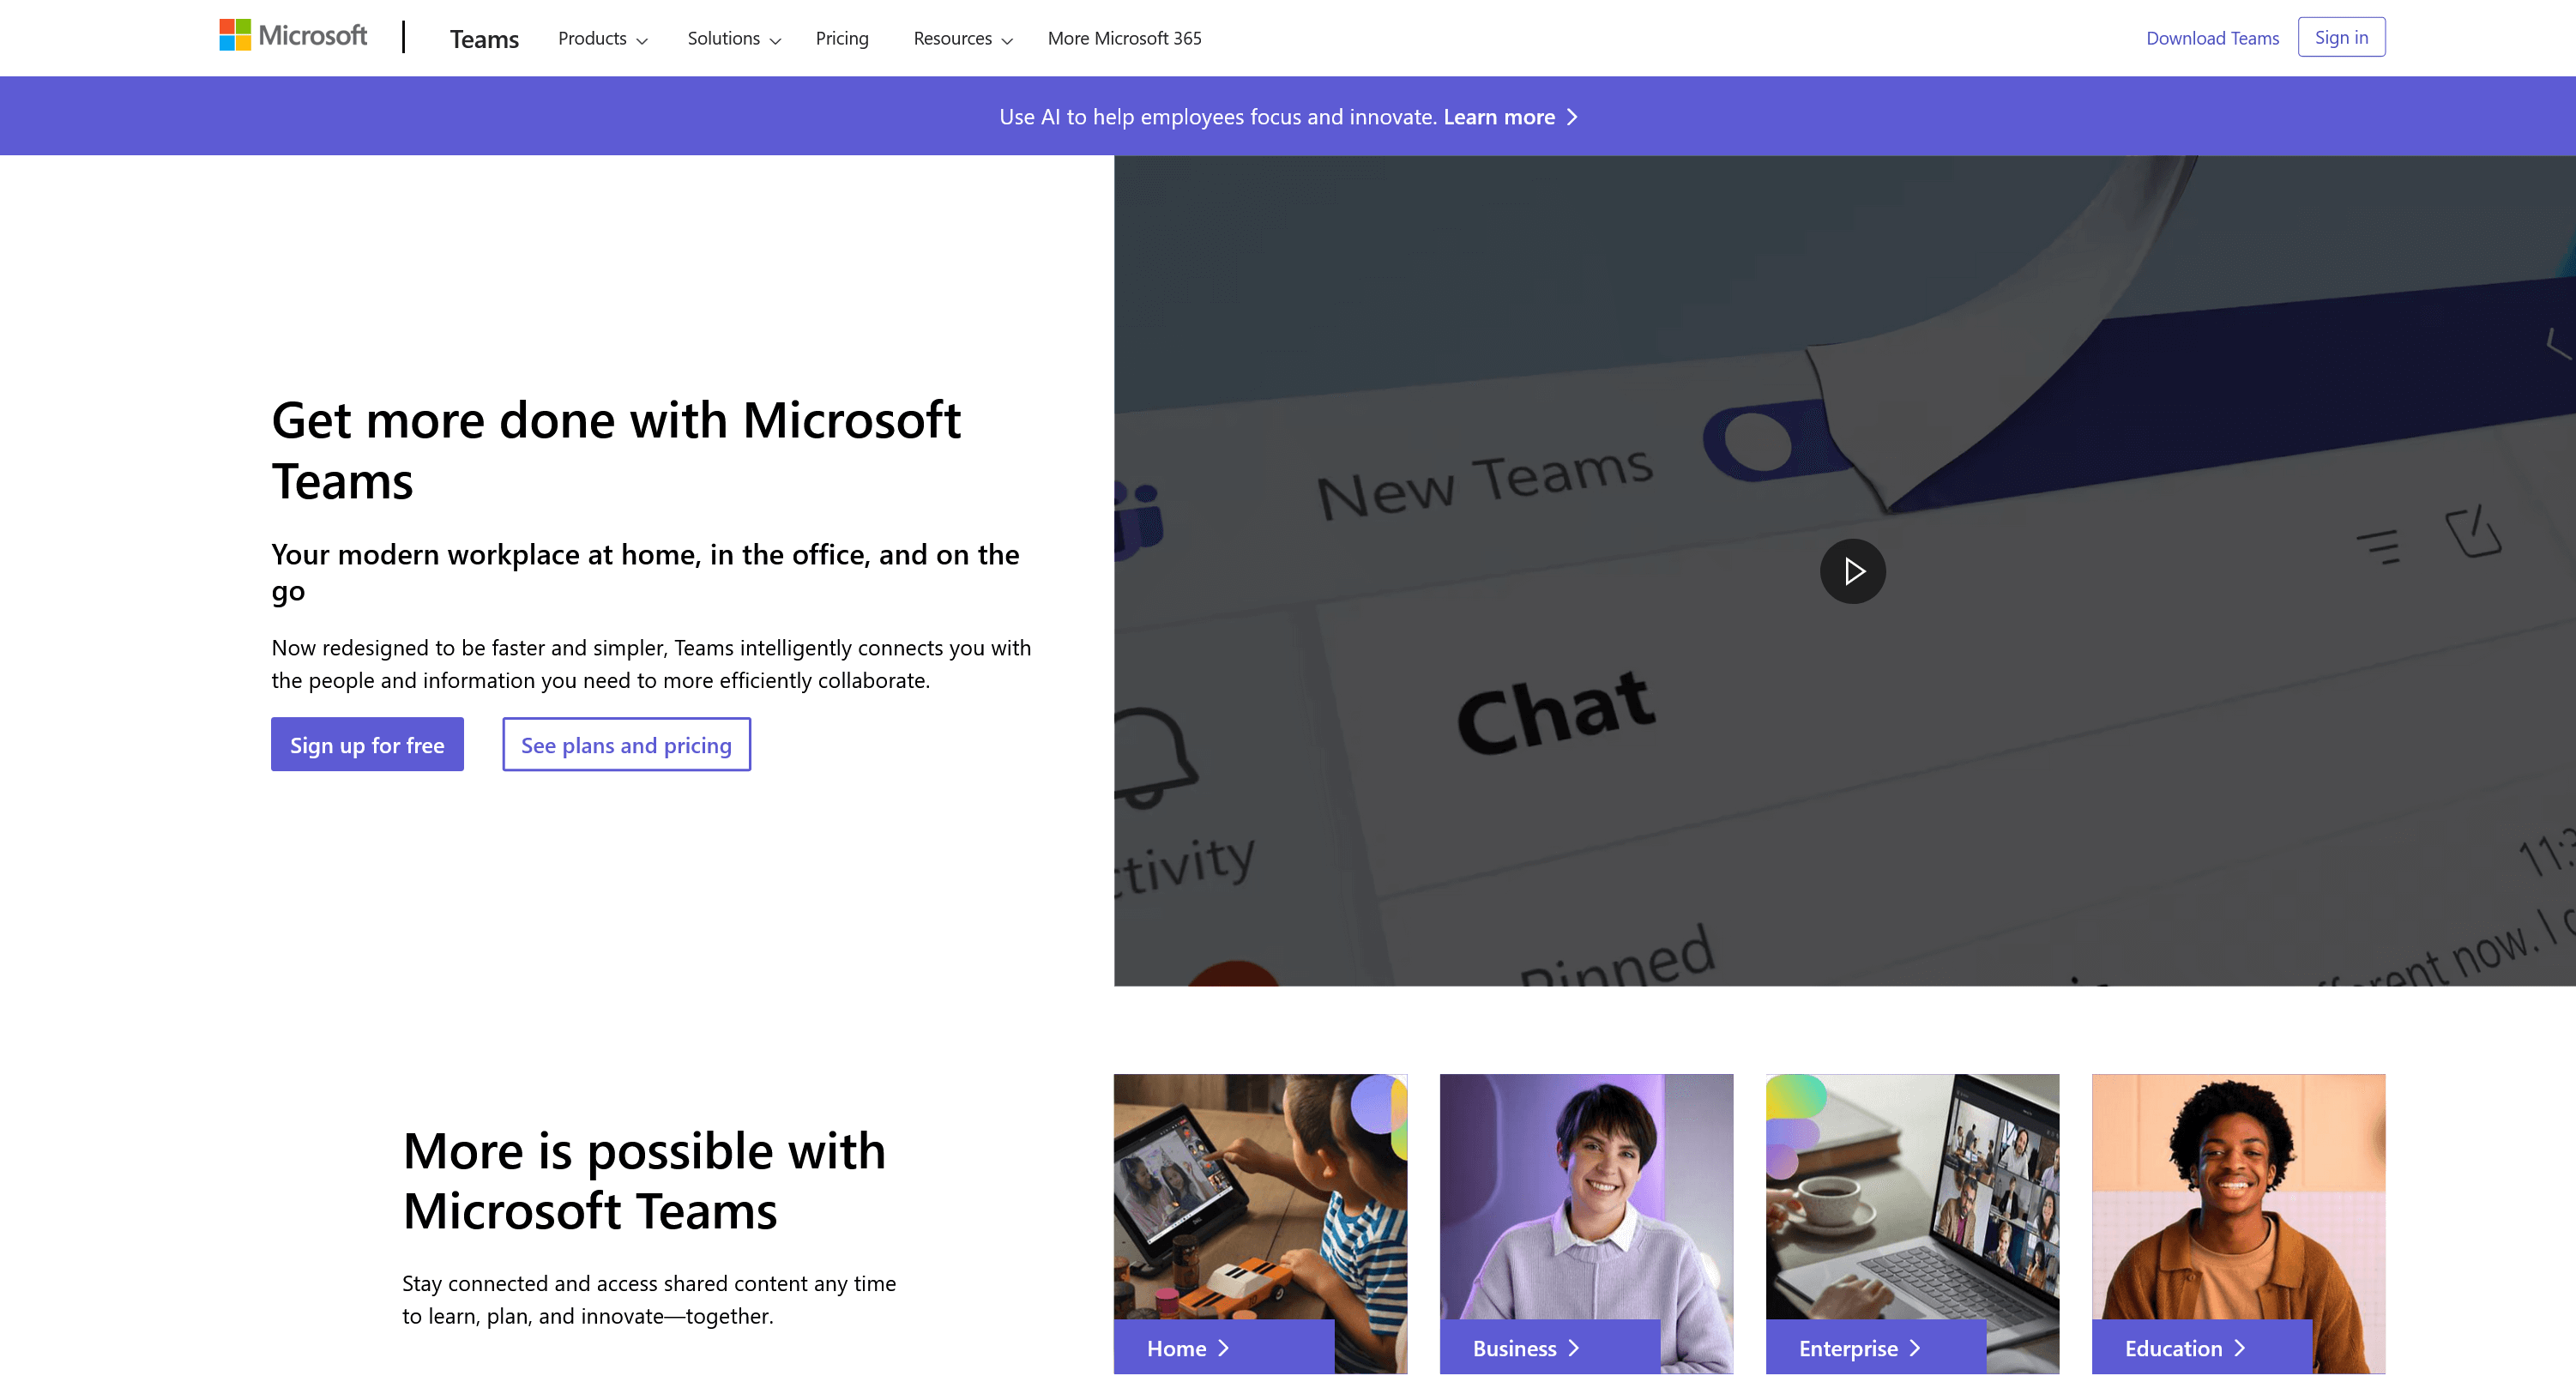 Microsoft Teams is a chat-based B2B workspace that integrates with Office 365